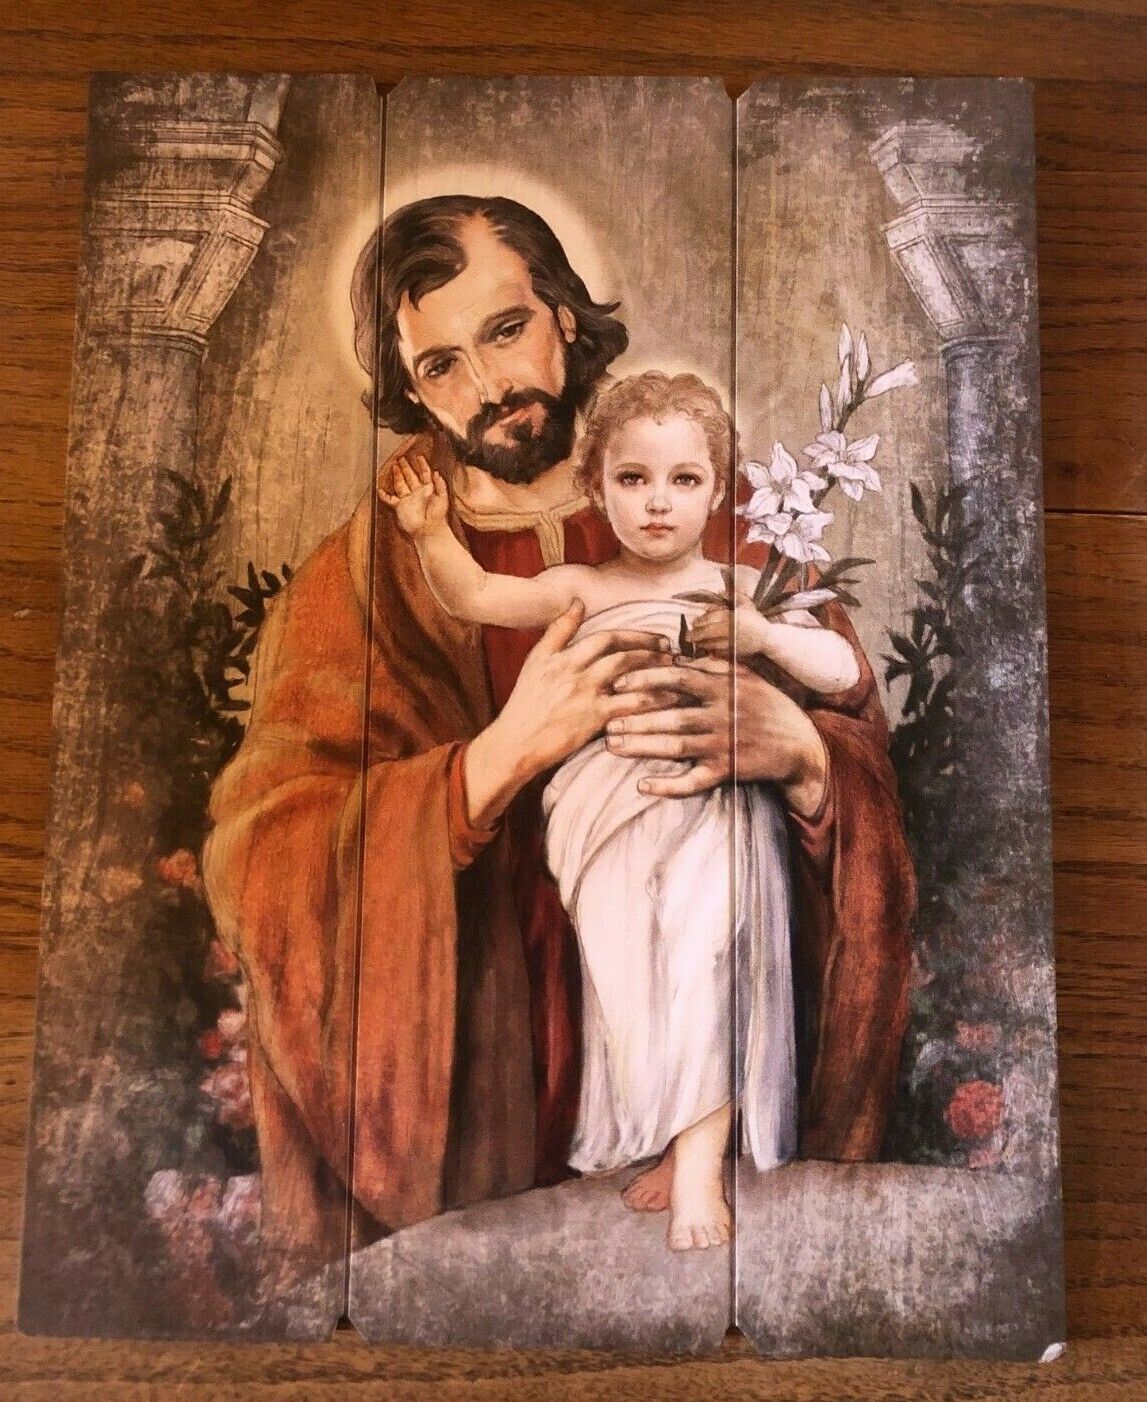 Saint Joseph with Child Image on Wood Pallet, New - Bob and Penny Lord